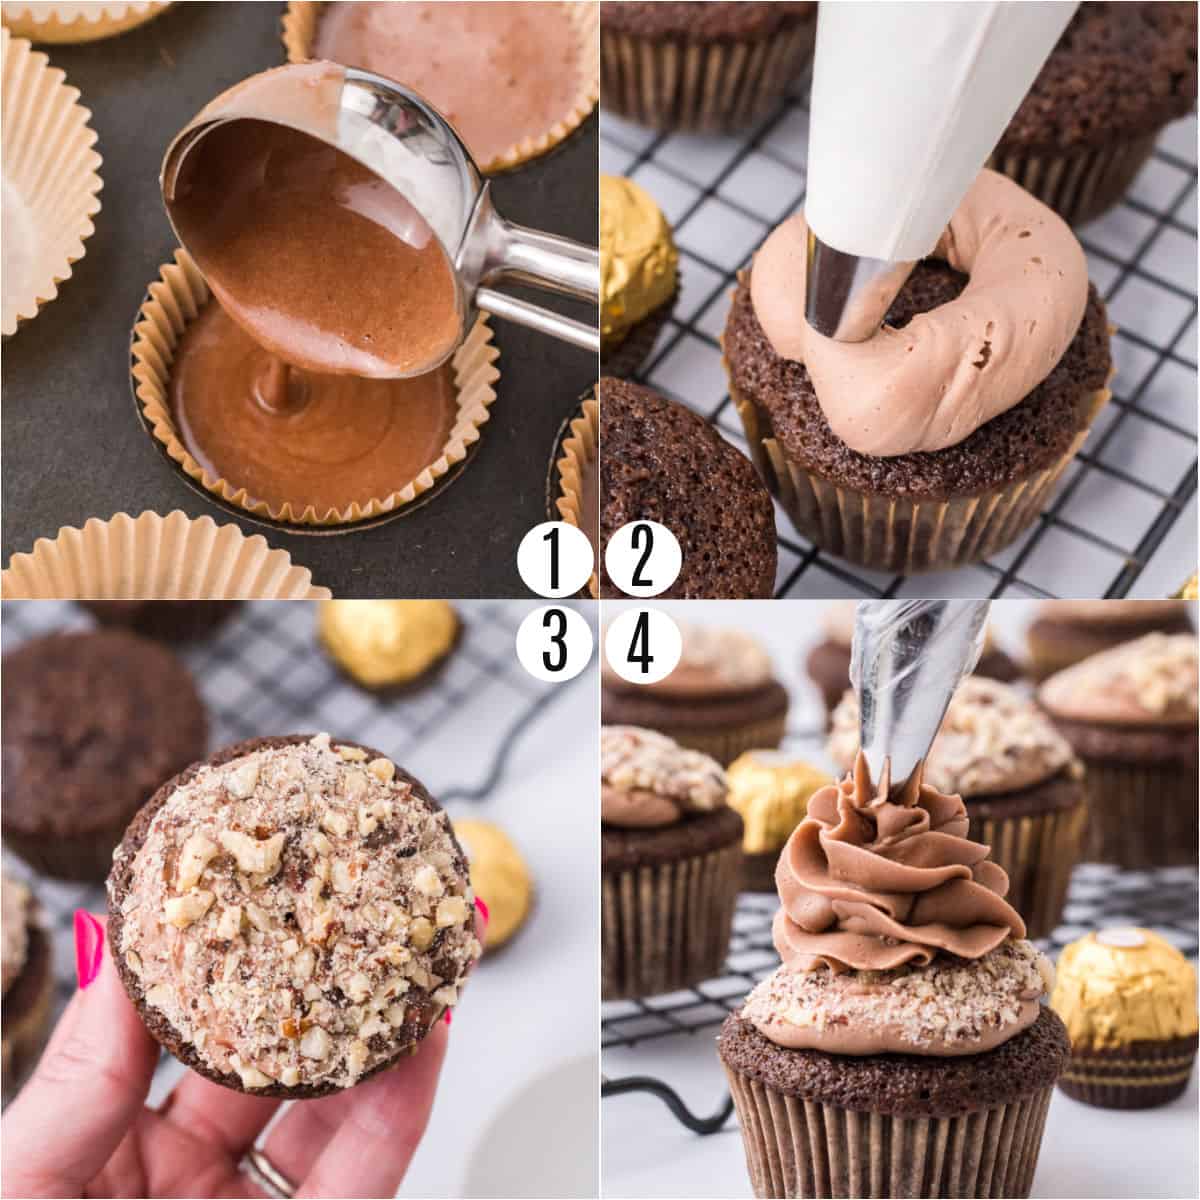 Step by step photos showing how to make ferrero rocher cupcakes.